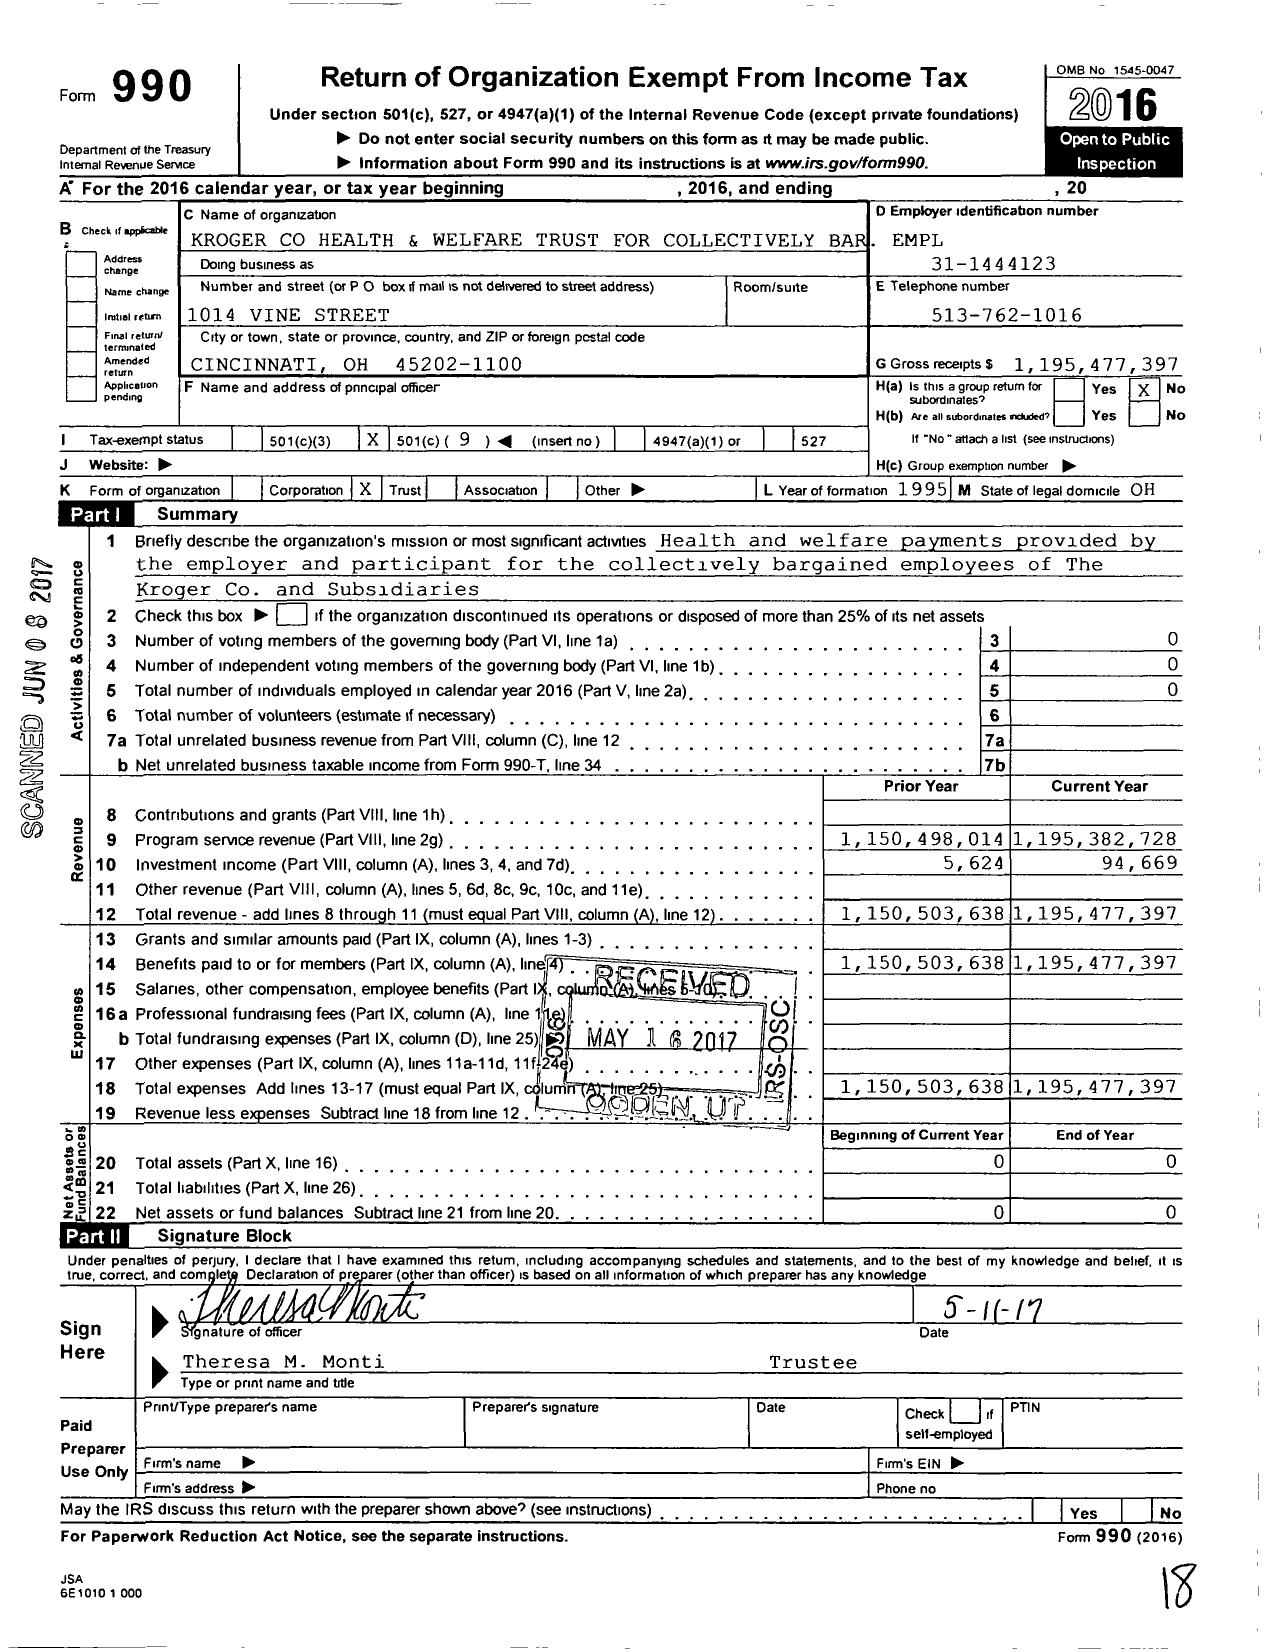 Image of first page of 2016 Form 990O for Kroger Health and Welfare Trust for Collectively Bar Empl